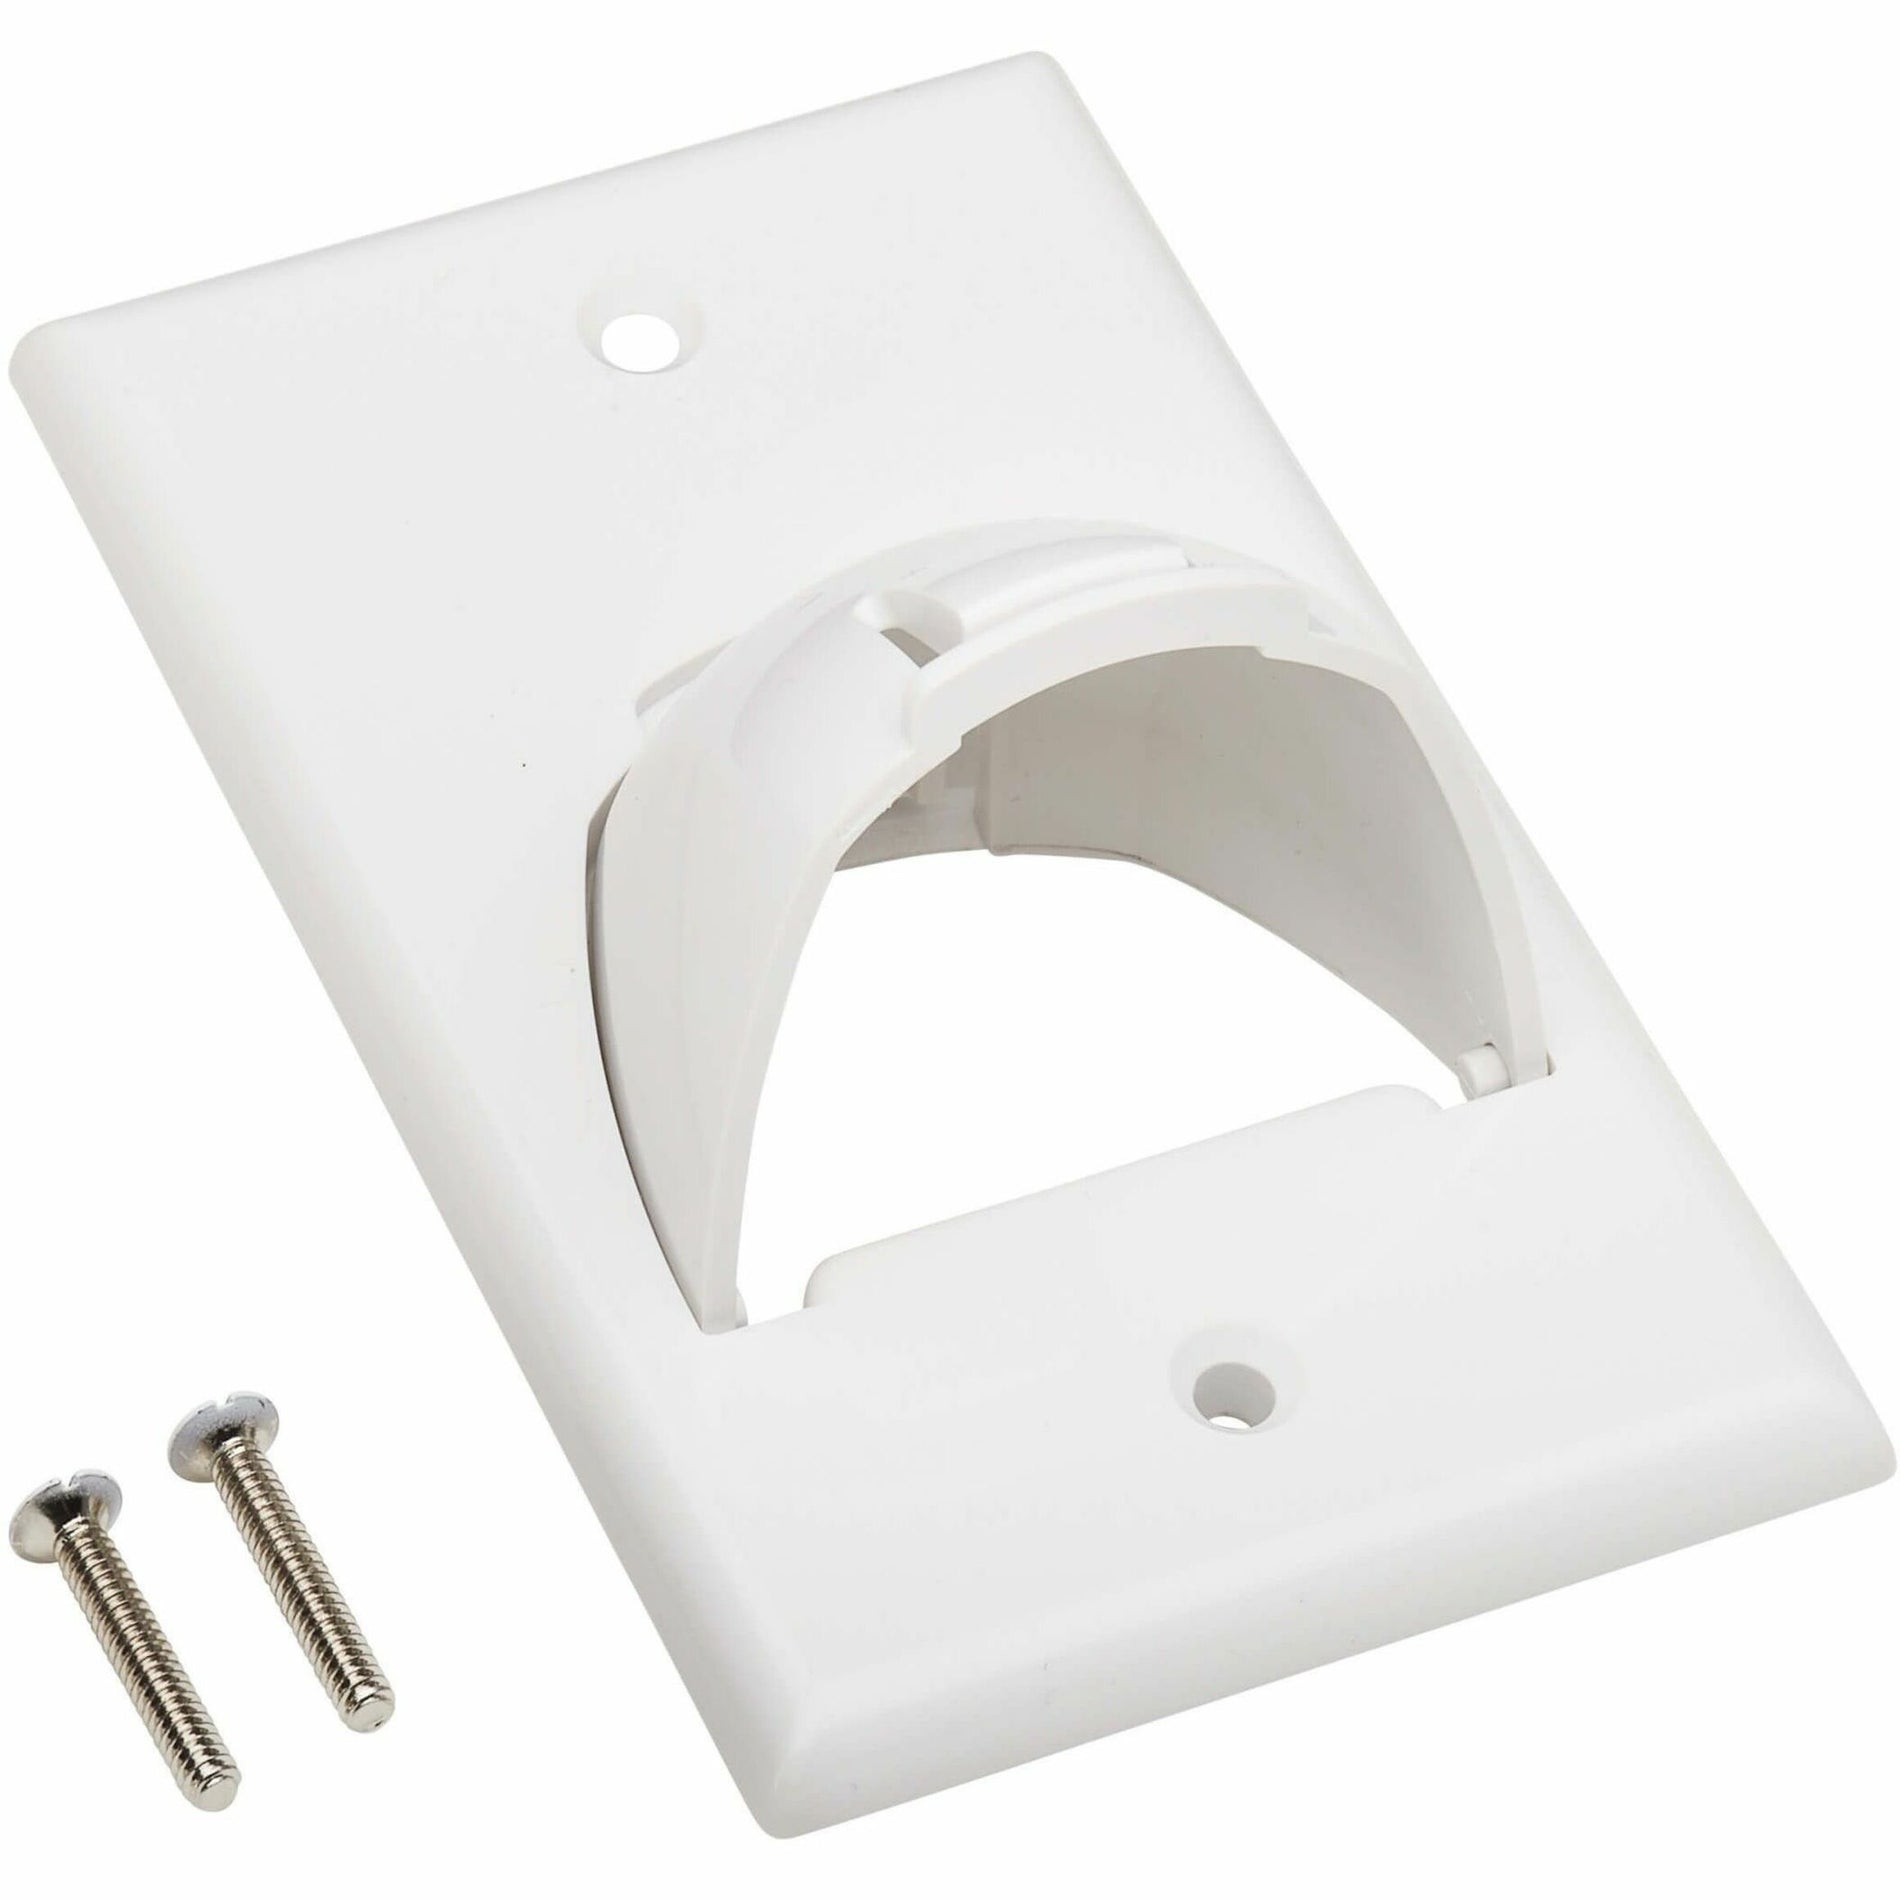 Tripp Lite N042-BC1-WH Single-Gang Up-or Down-Angle Bulk Cable Wall Plate, White, TAA Compliant, Home Theater, Auditorium, Office, Conference Room